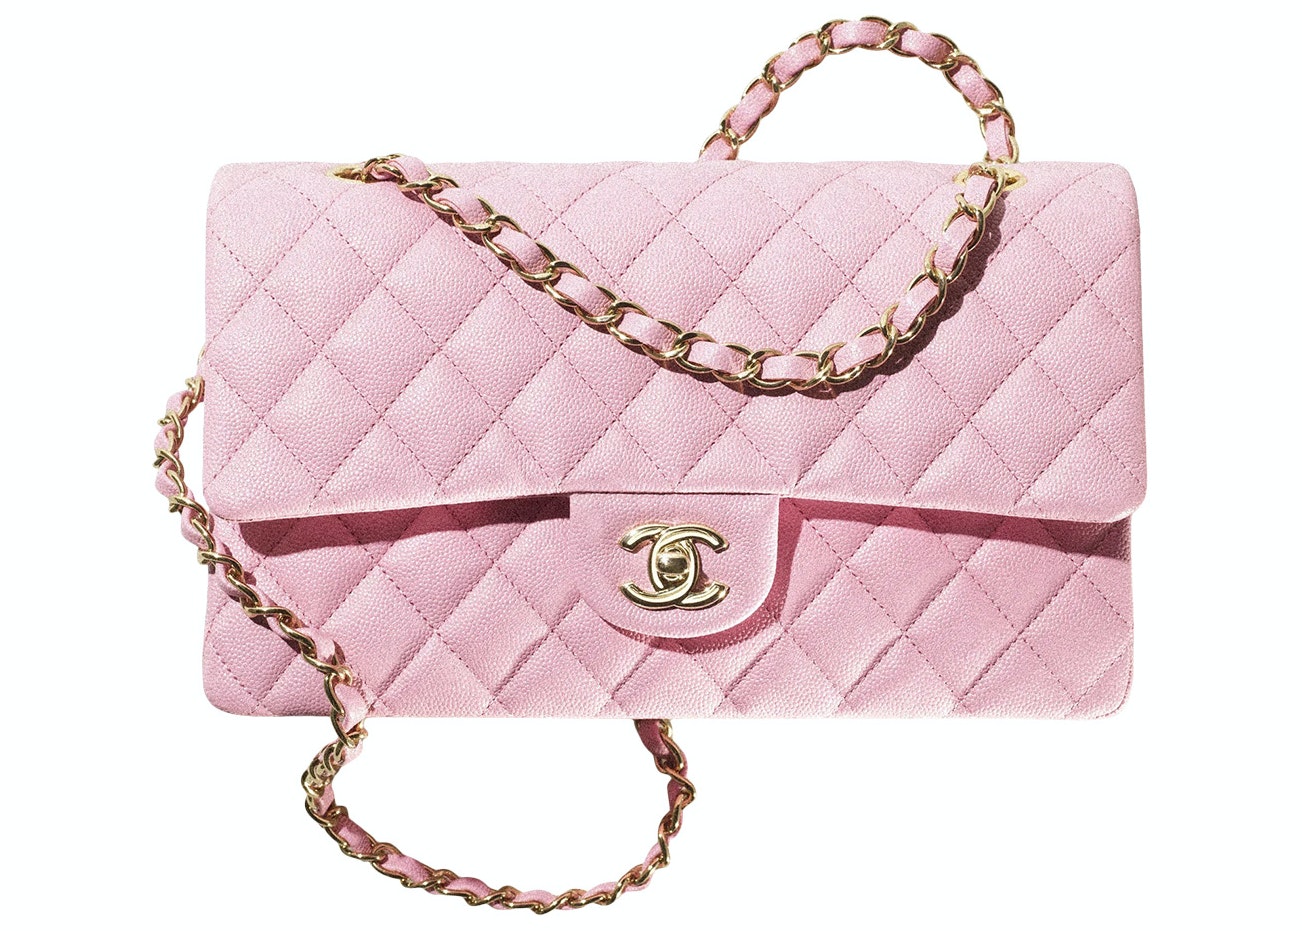 CHANEL Mixed Fibers Small Deauville Tote Pink 1203617  FASHIONPHILE